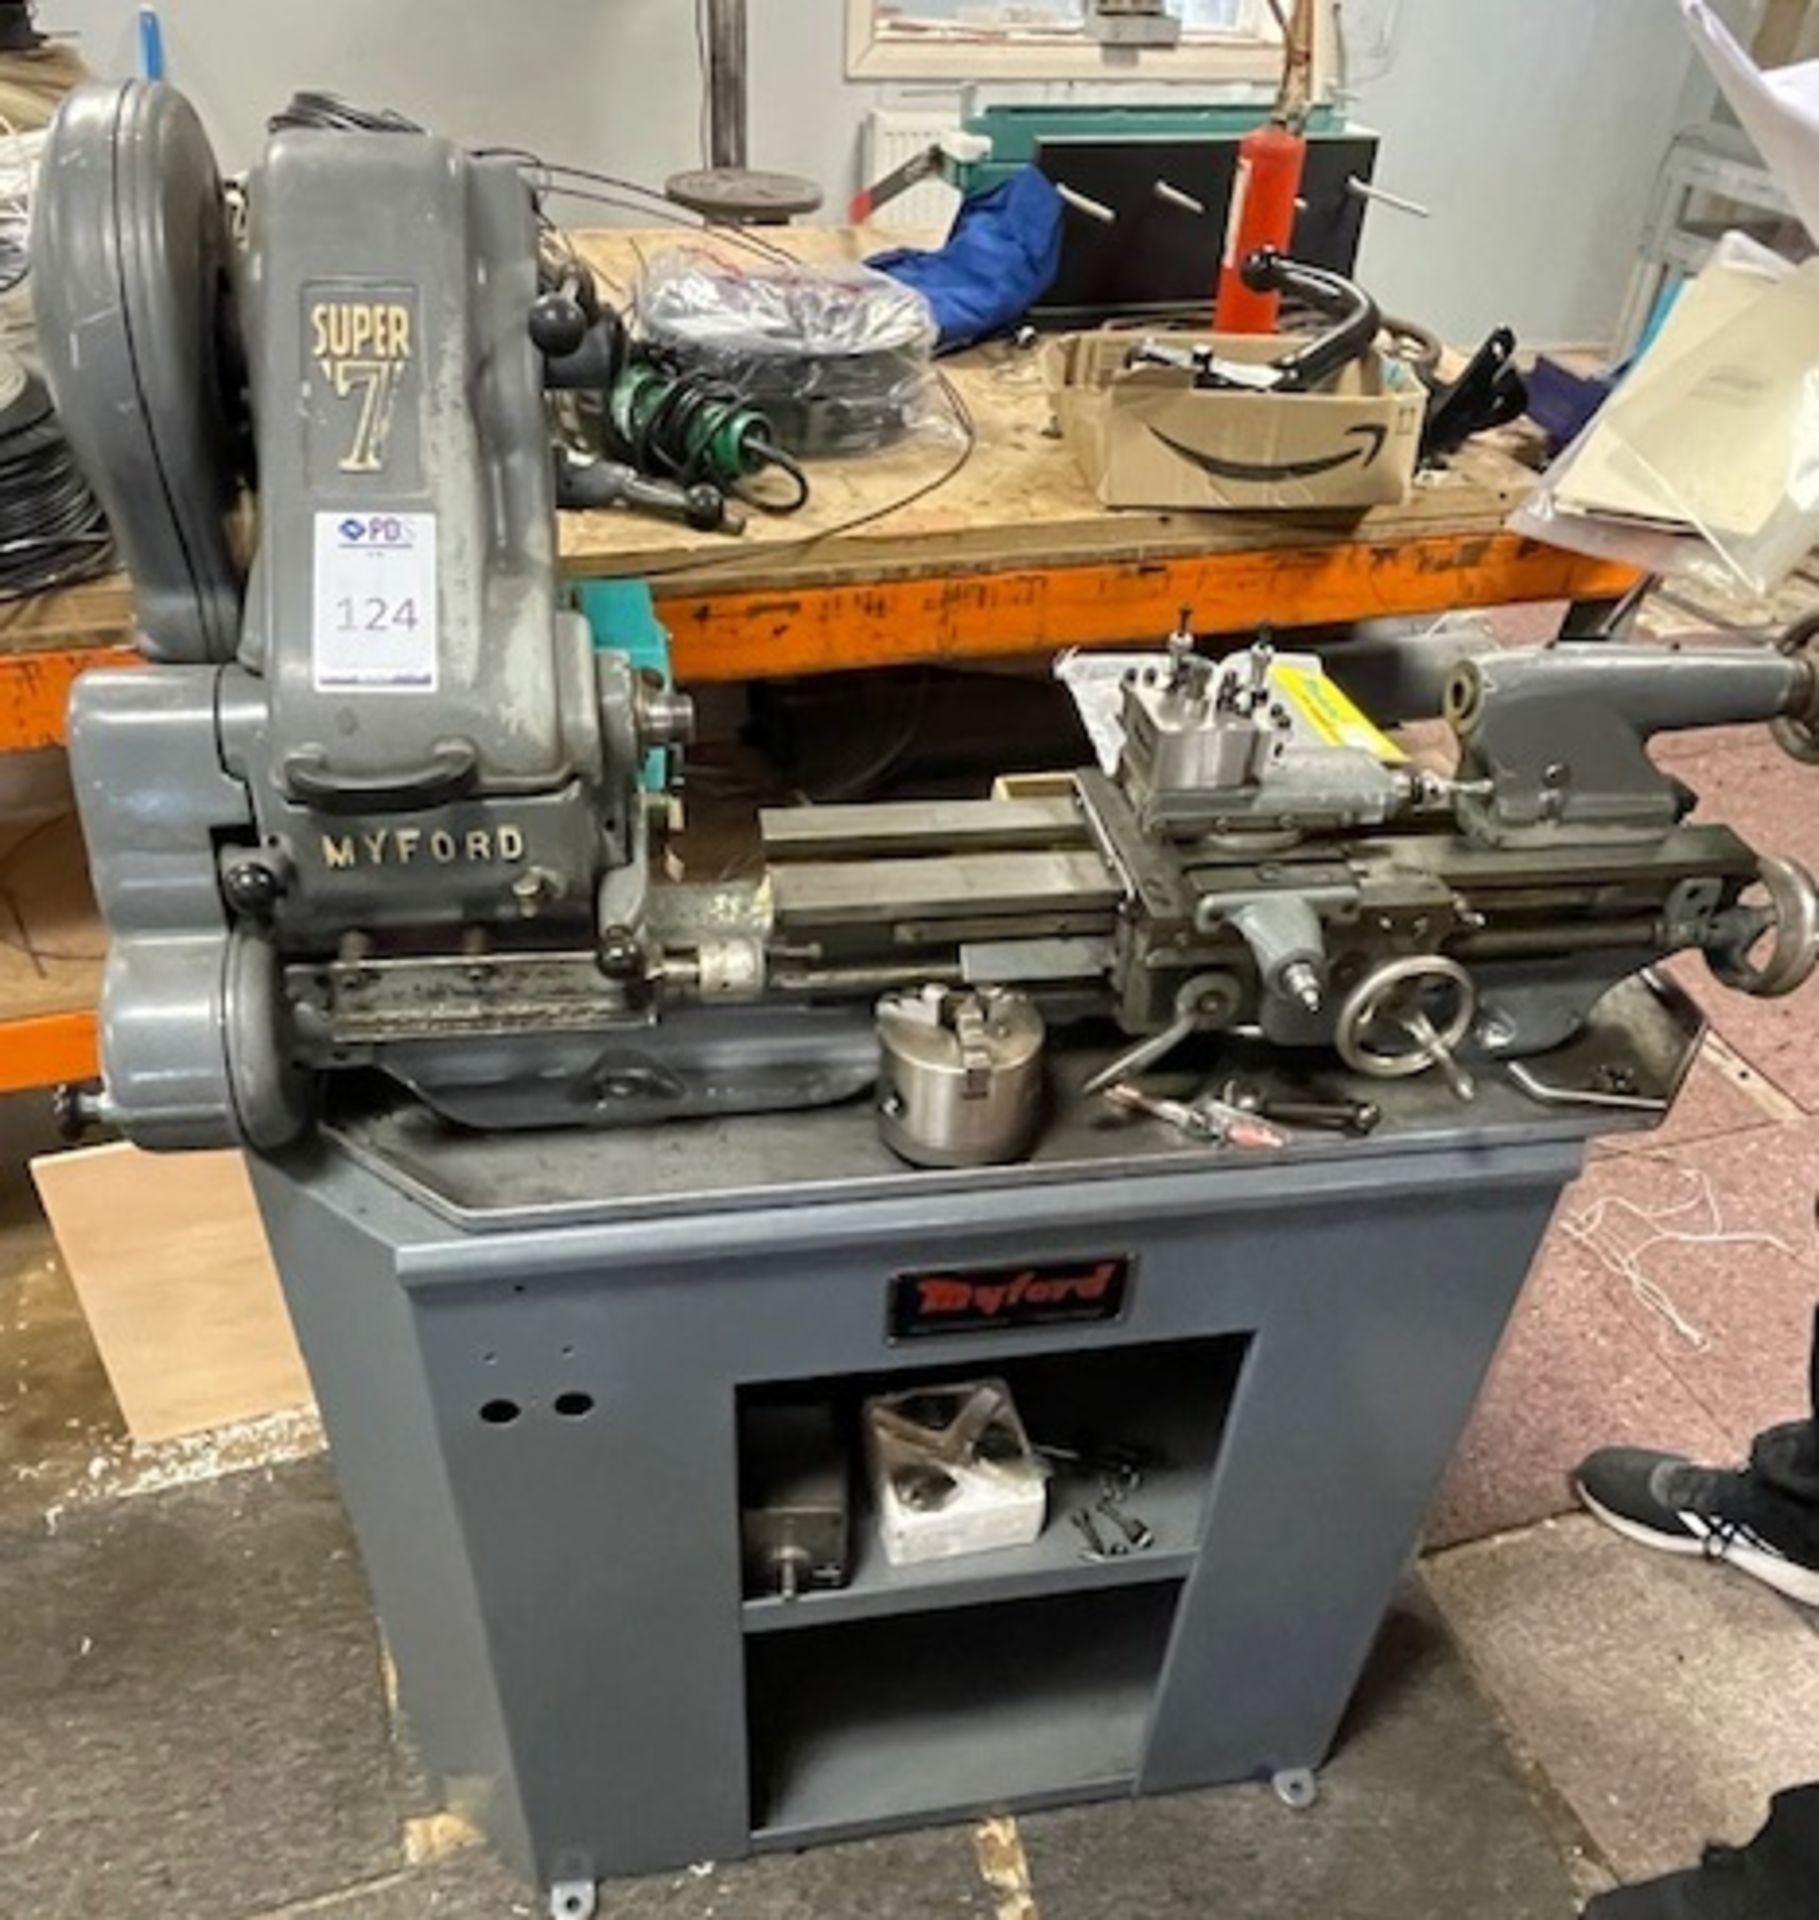 Myford Super 7 Lathe 240v with 3 Jaw Chuck, Tooling, Original User & Parts Manuals (Location: